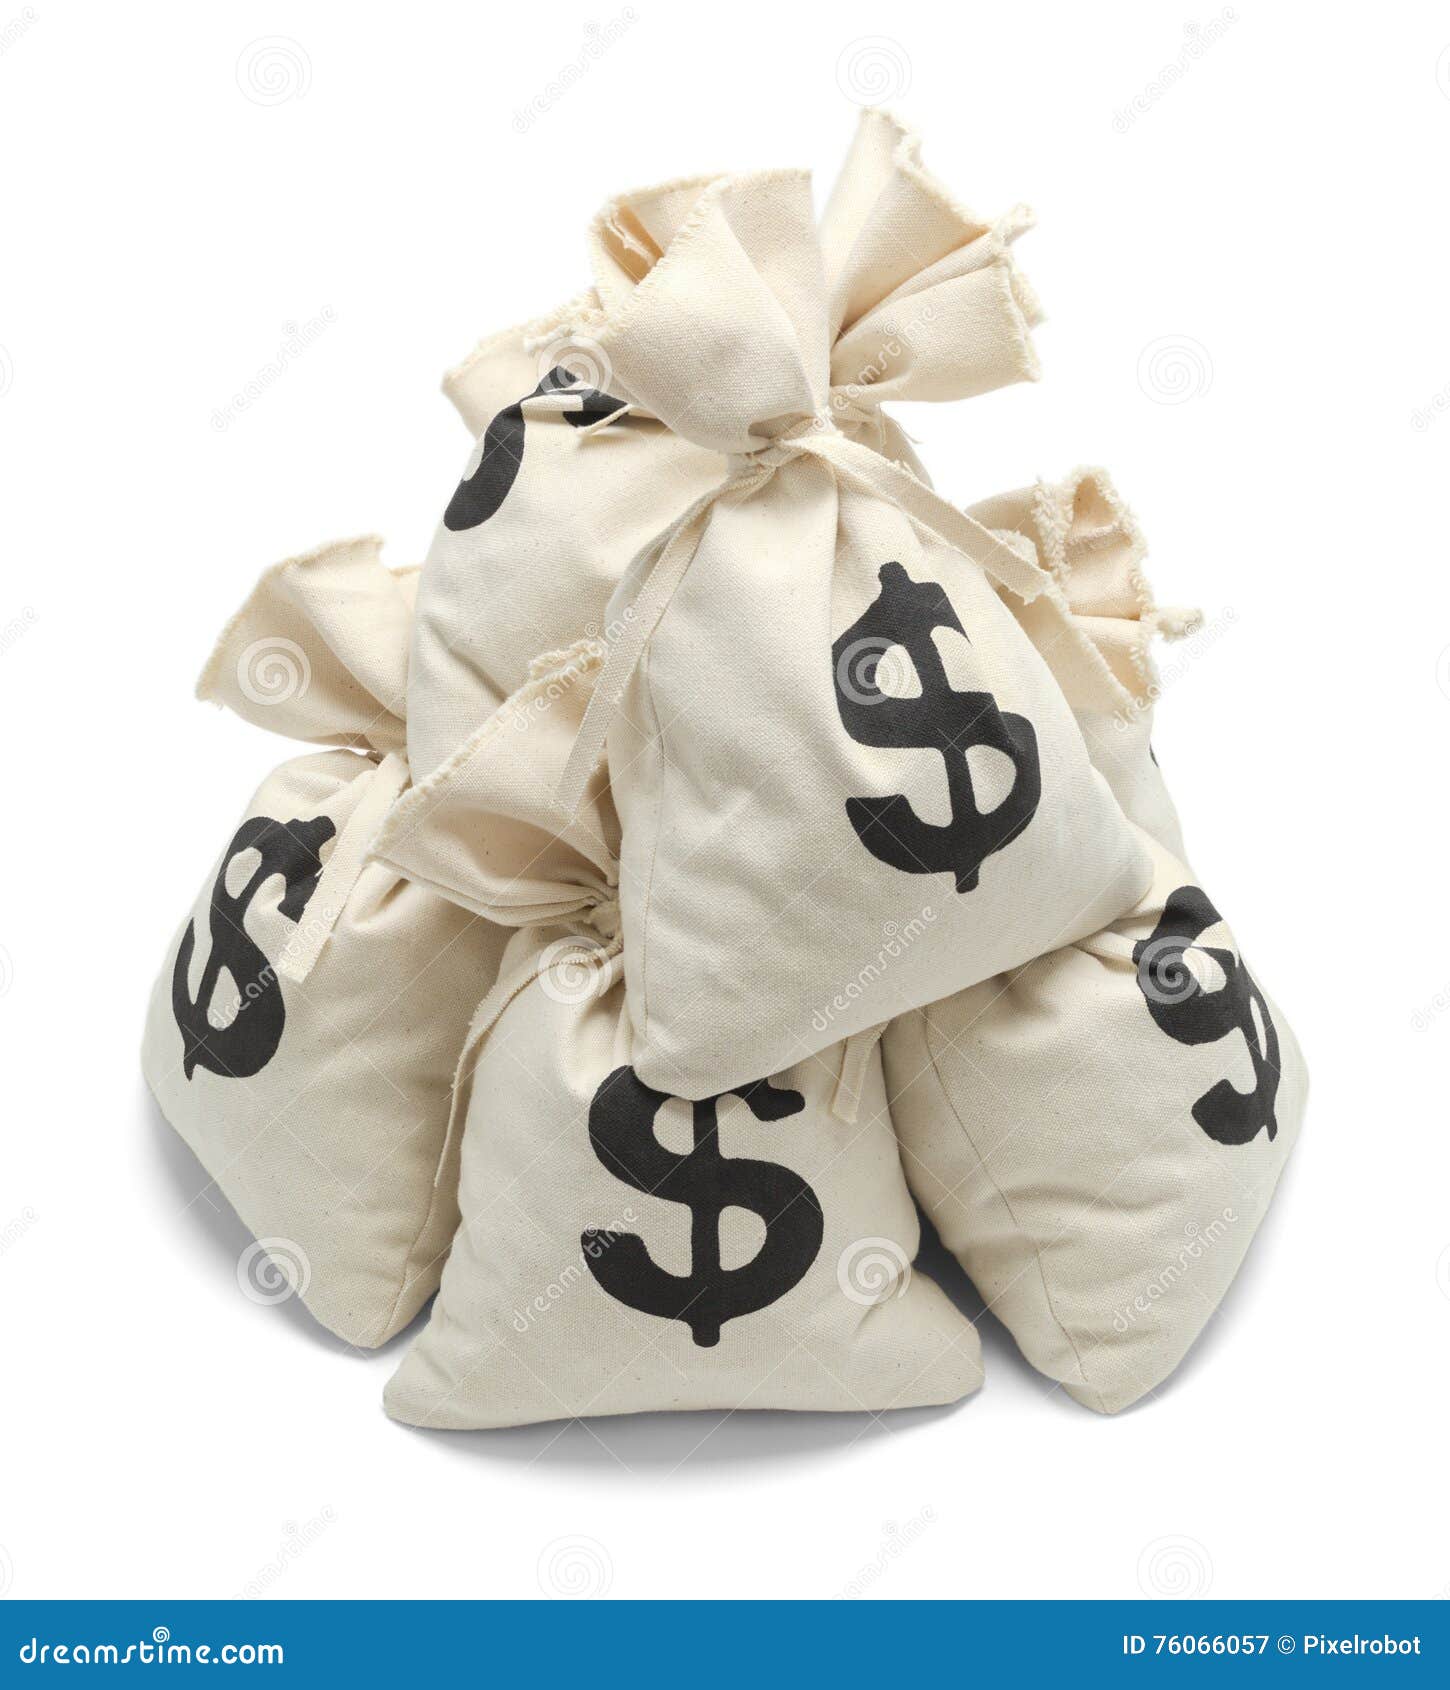 Image result for image of money bags